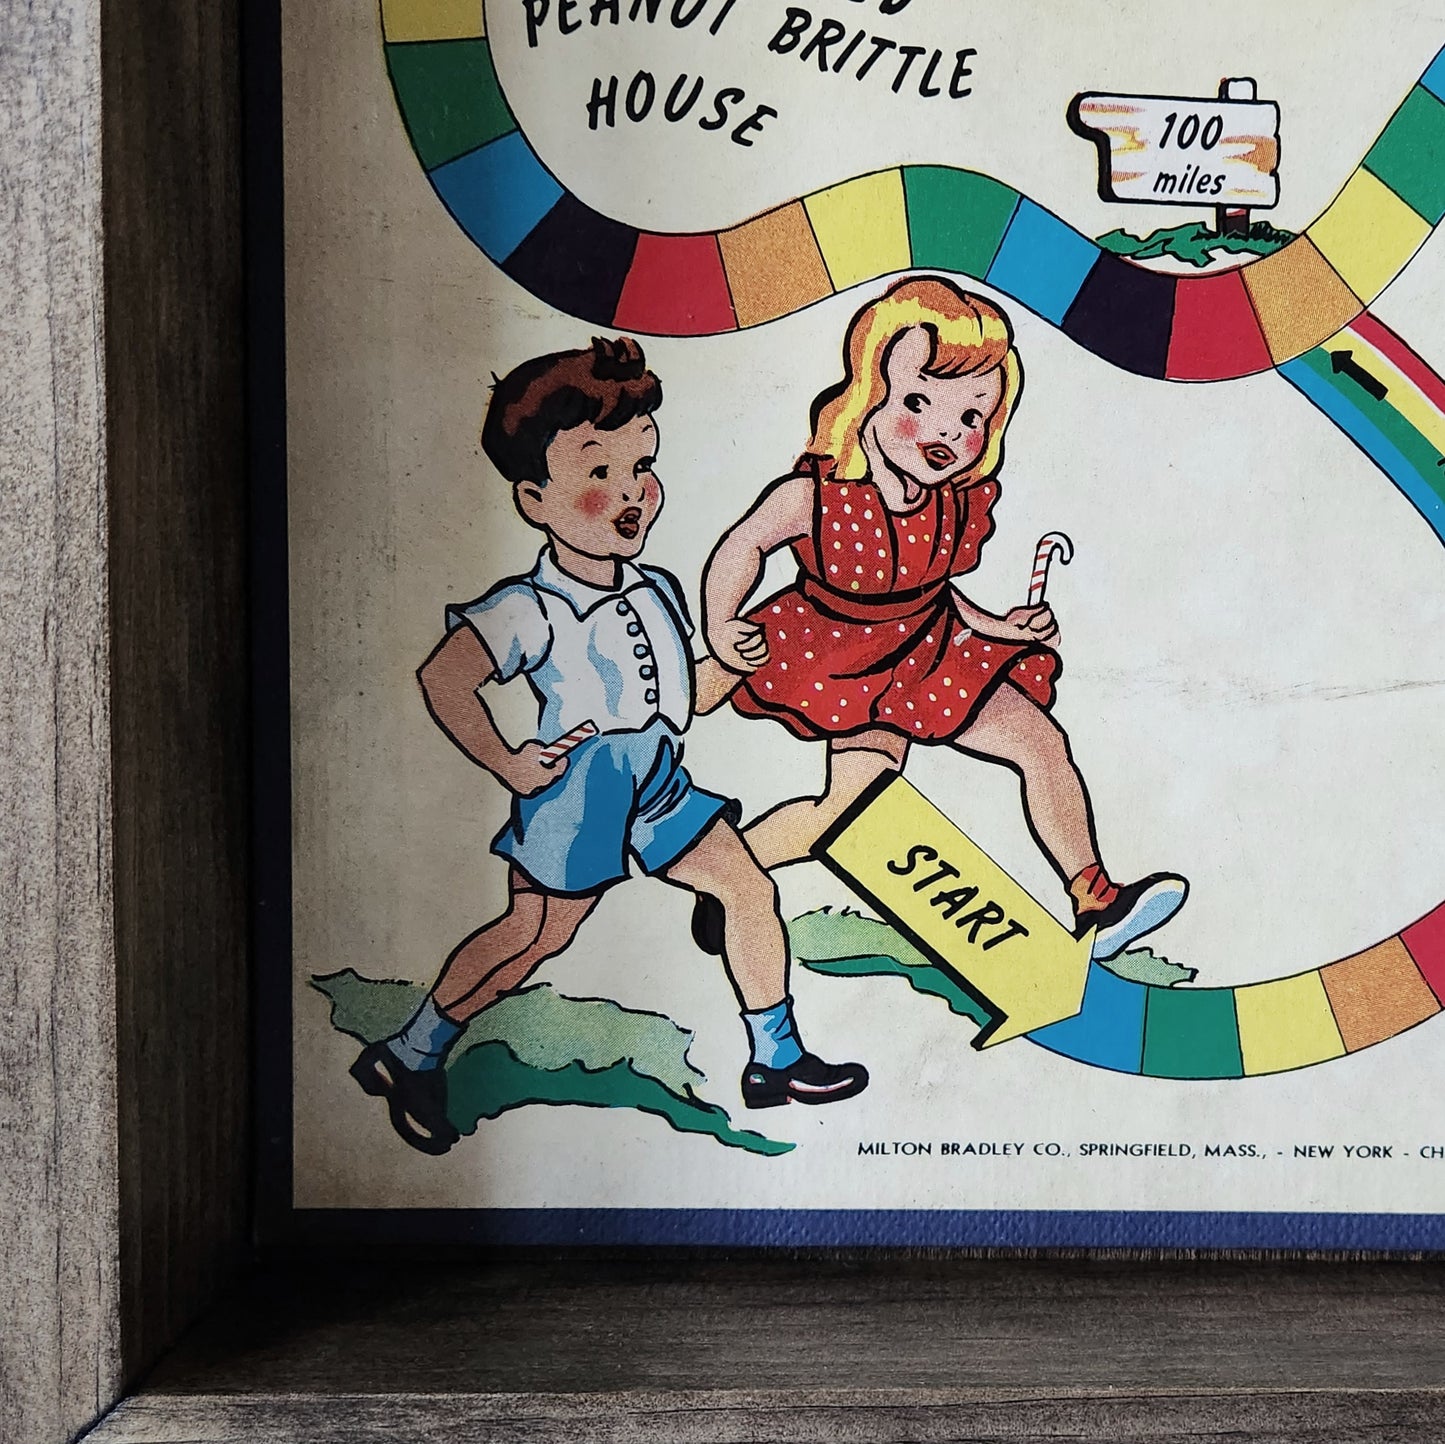 Display and Play 1949 Rare Original Candy Land Framed Board Game